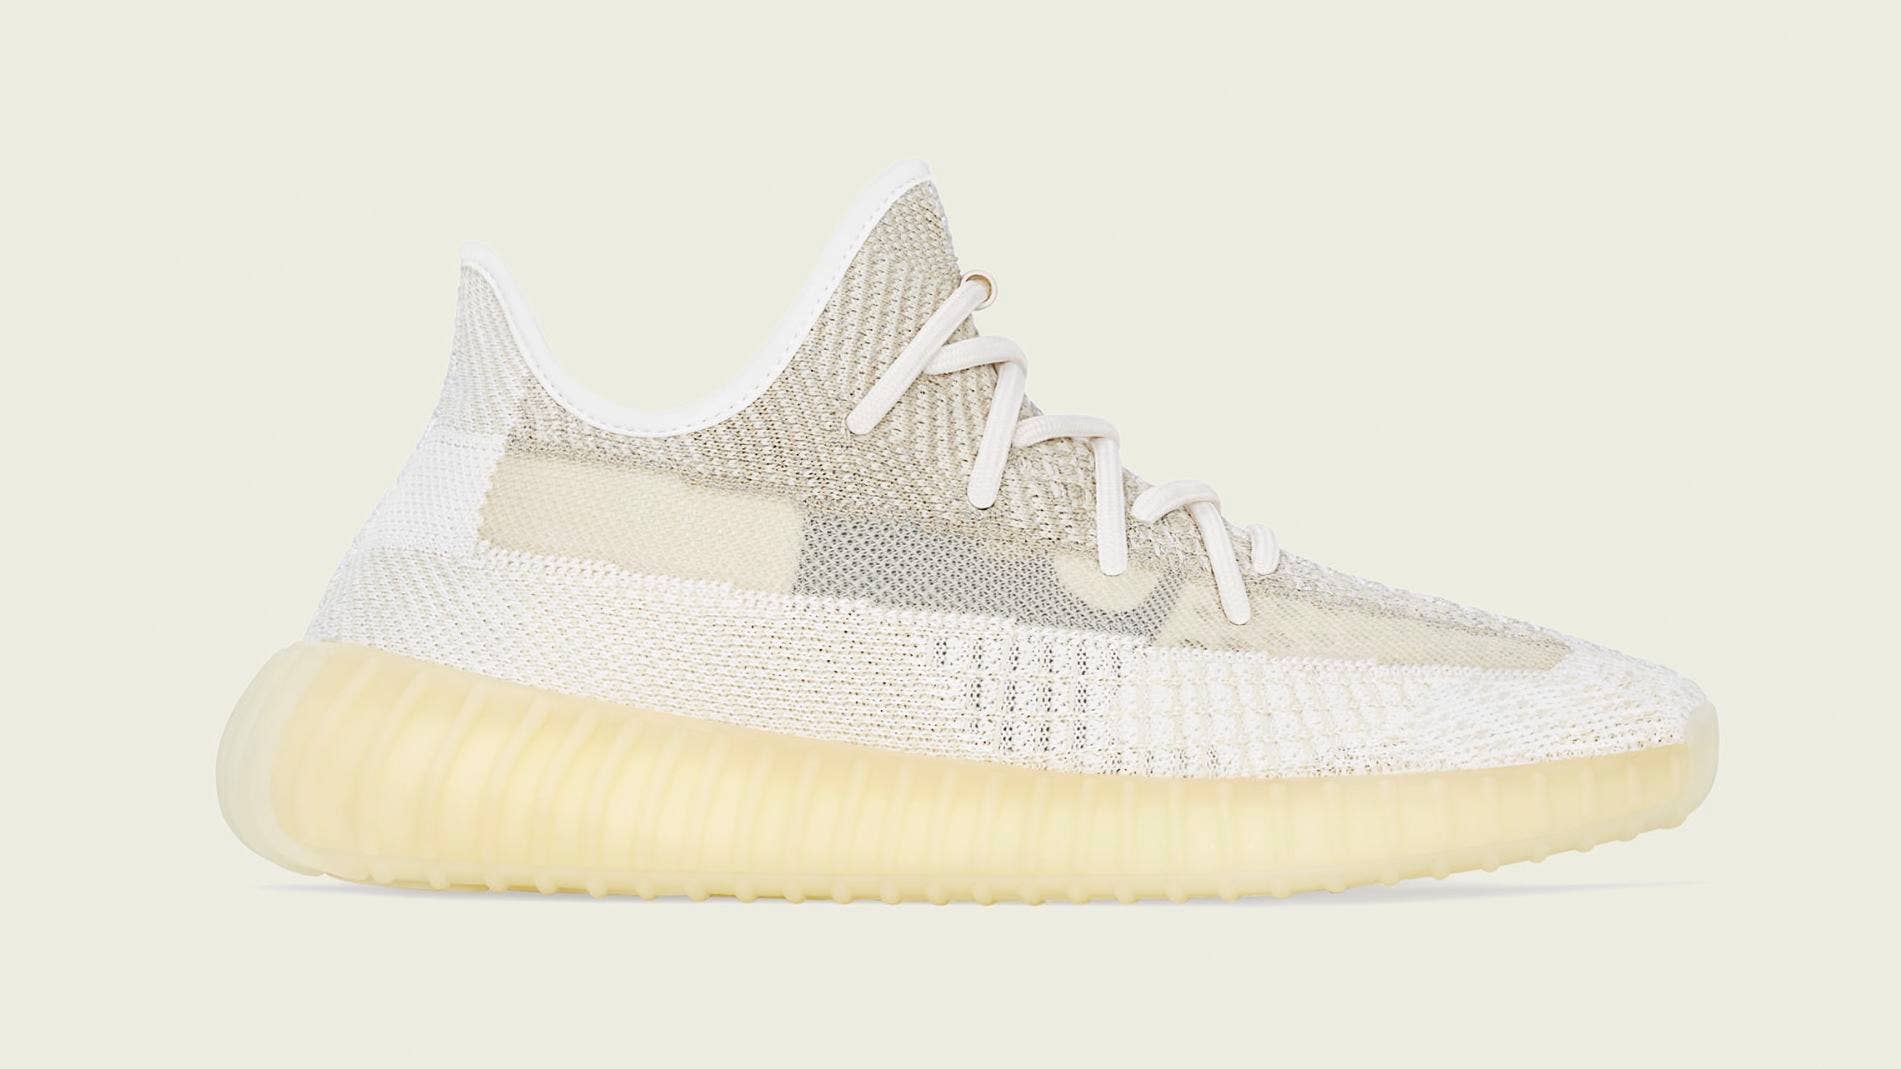 Adidas Yeezy Boost 350 V2 'Natural' FZ5246 Lateral